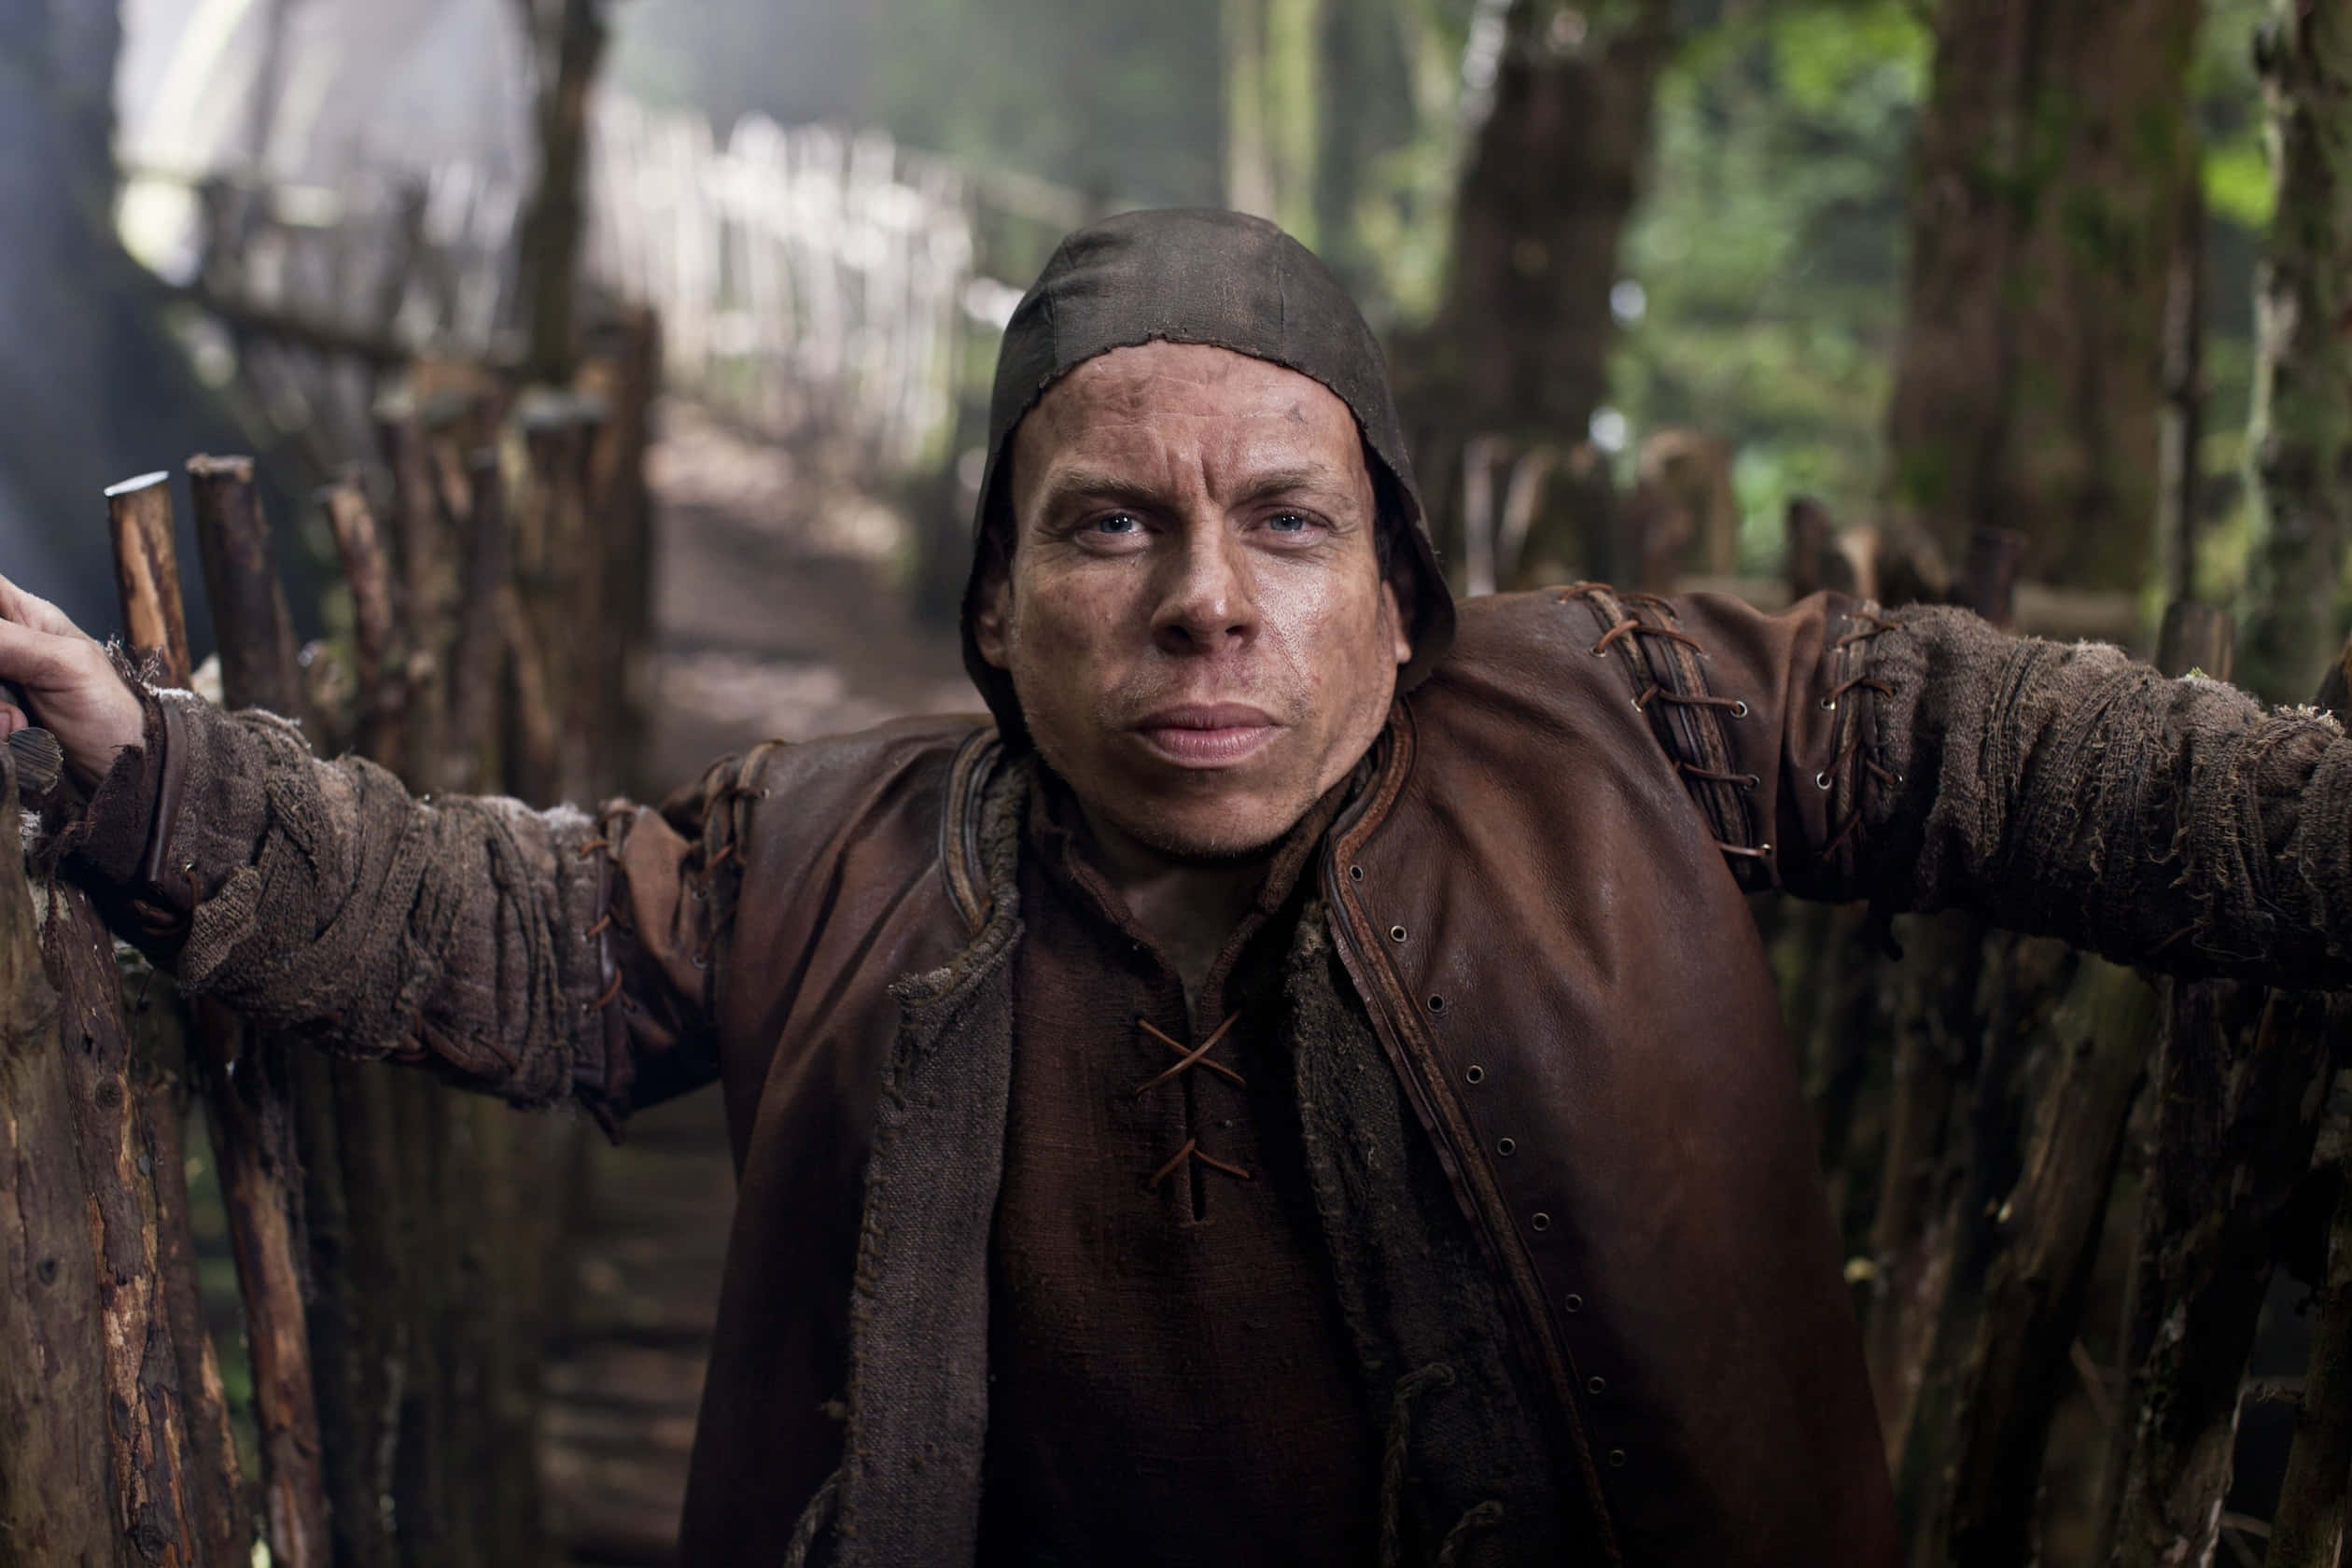 Warwick Davis strikes a pose in a relaxed photoshoot Wallpaper